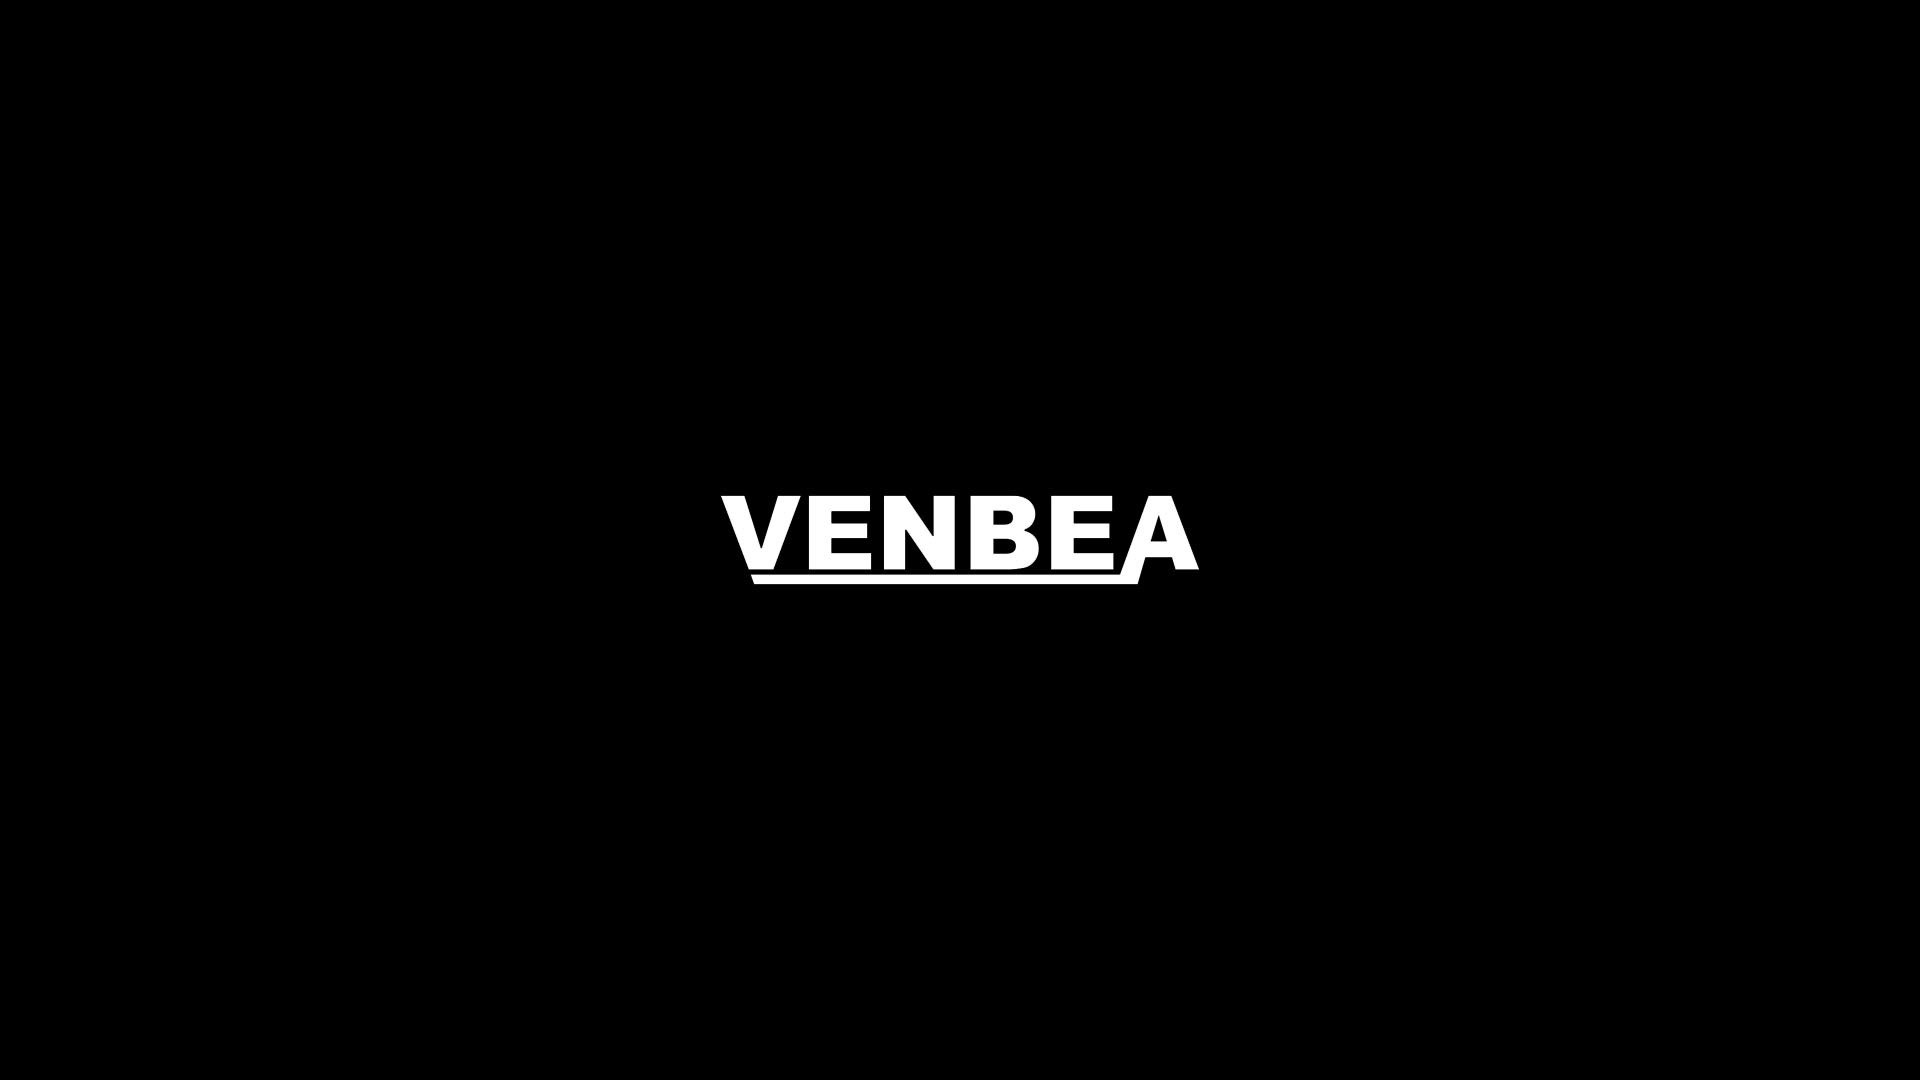 Venbea Imaging is a leader in large format printing industry in Santa Ana, CA.